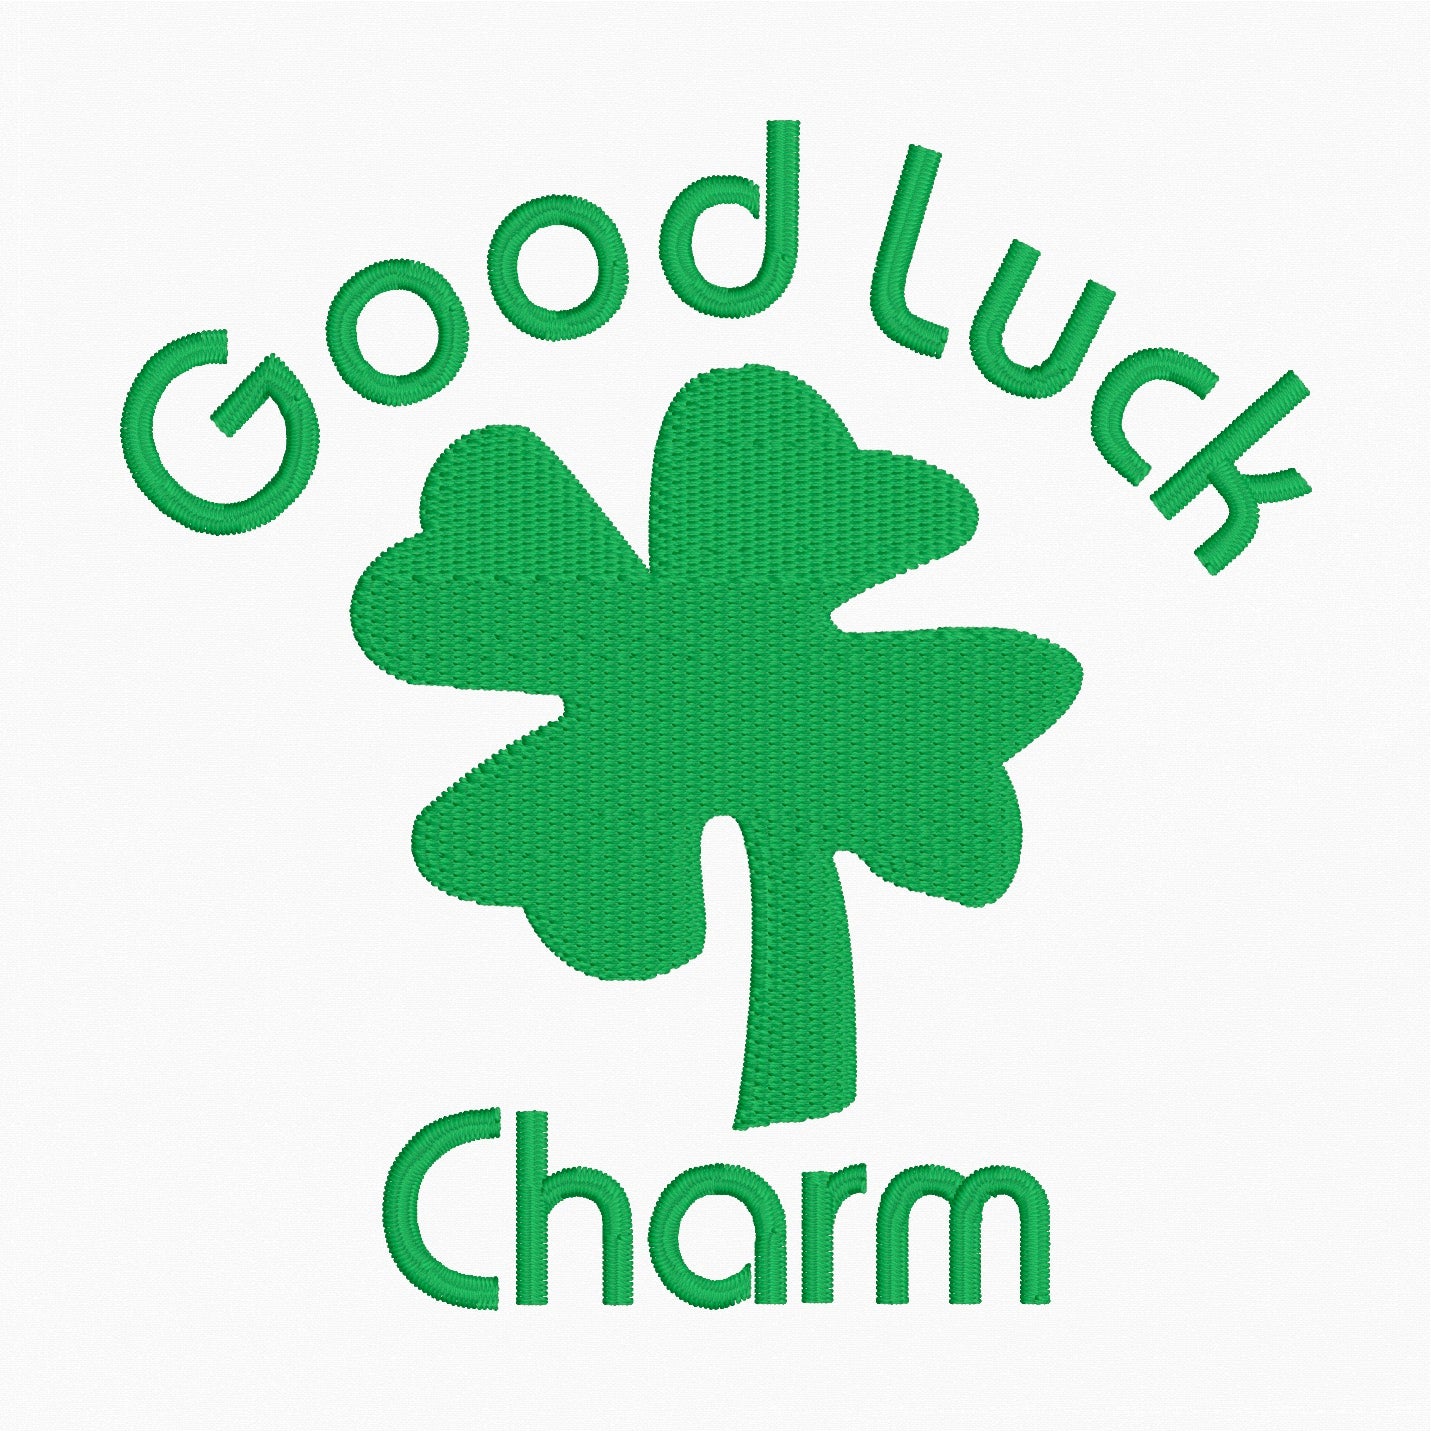 Good Luck Charm - Machine Embroidery Design - 4x4 Hoop - Beachside Knits N Quilts